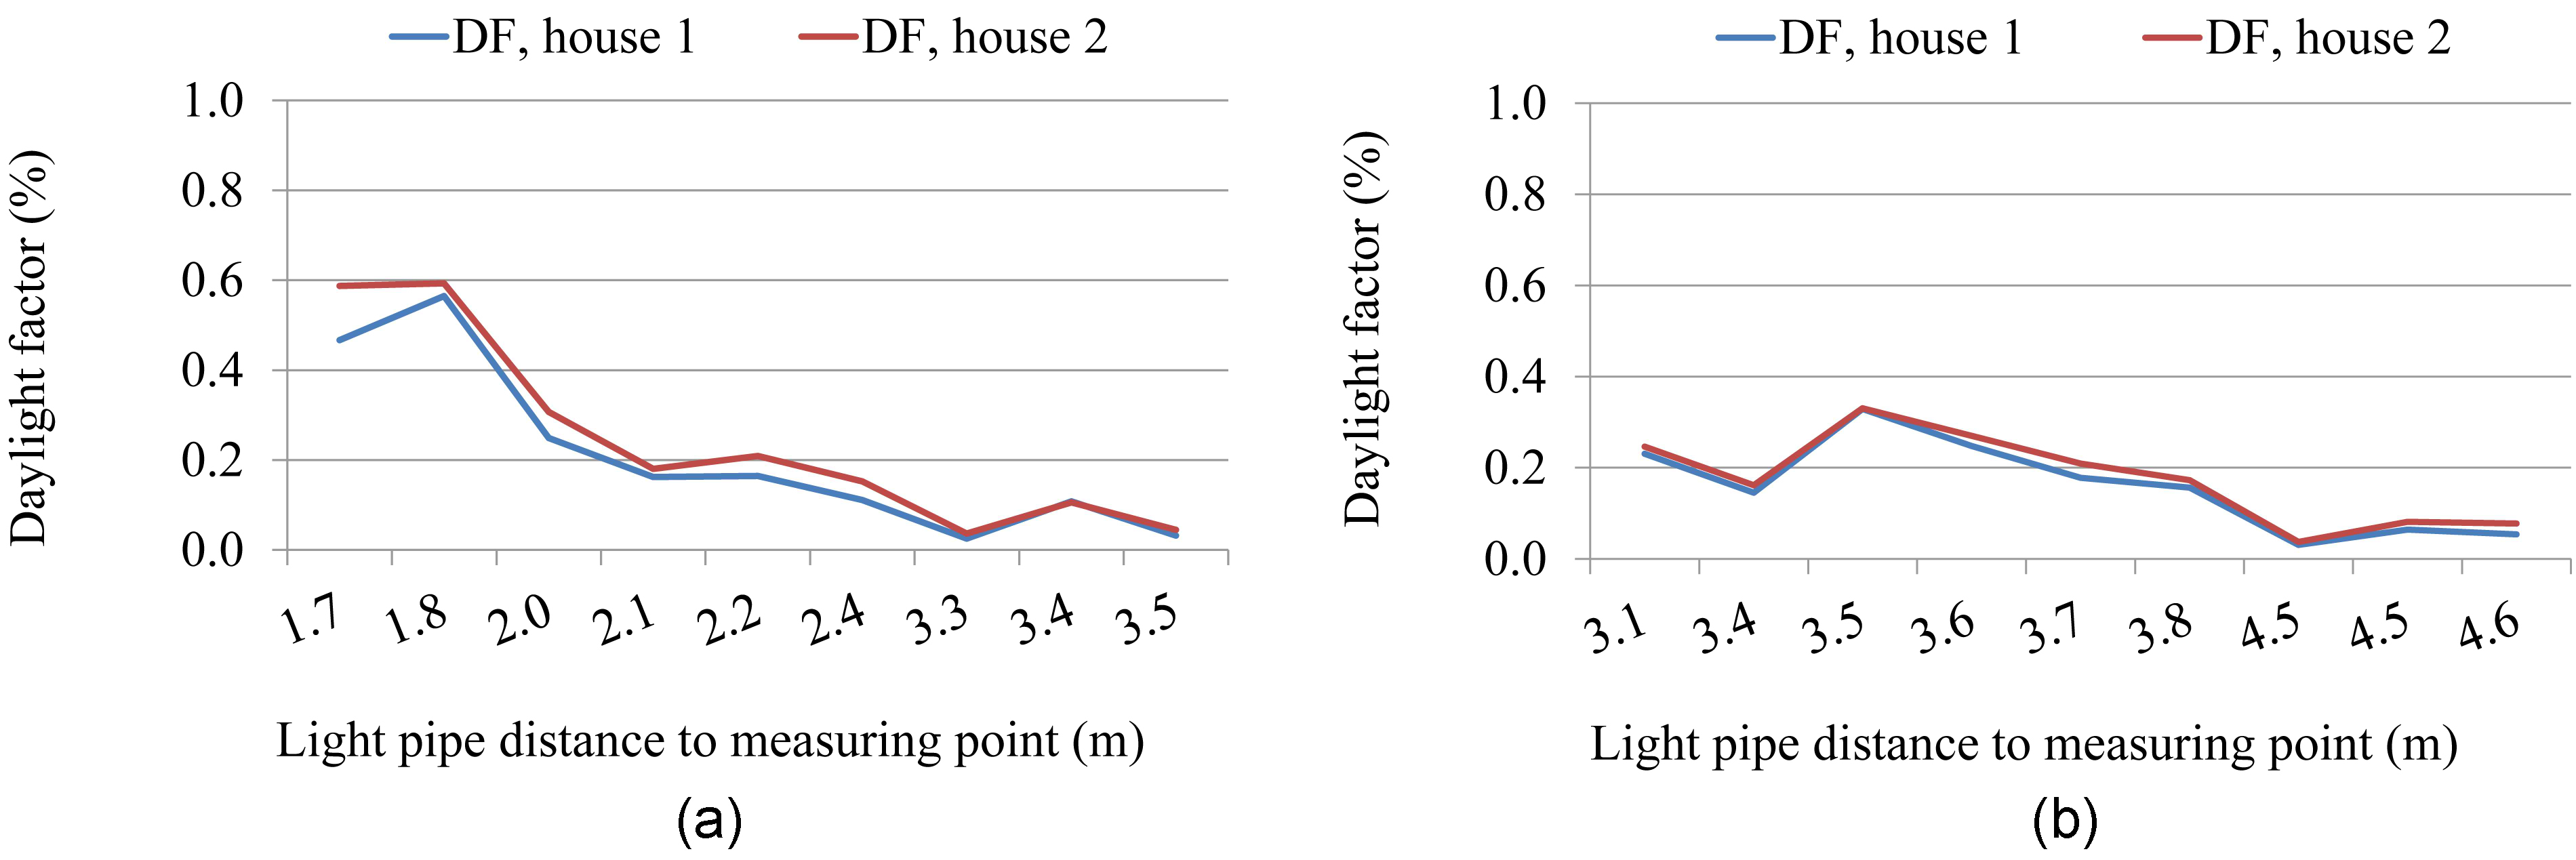 Daylight factor (DF, %) for house 1 and house 2, in relation to distance between light pipe and measuring point for (a) 1.5 m grid above floor level and (b) 0 m grid at floor level.